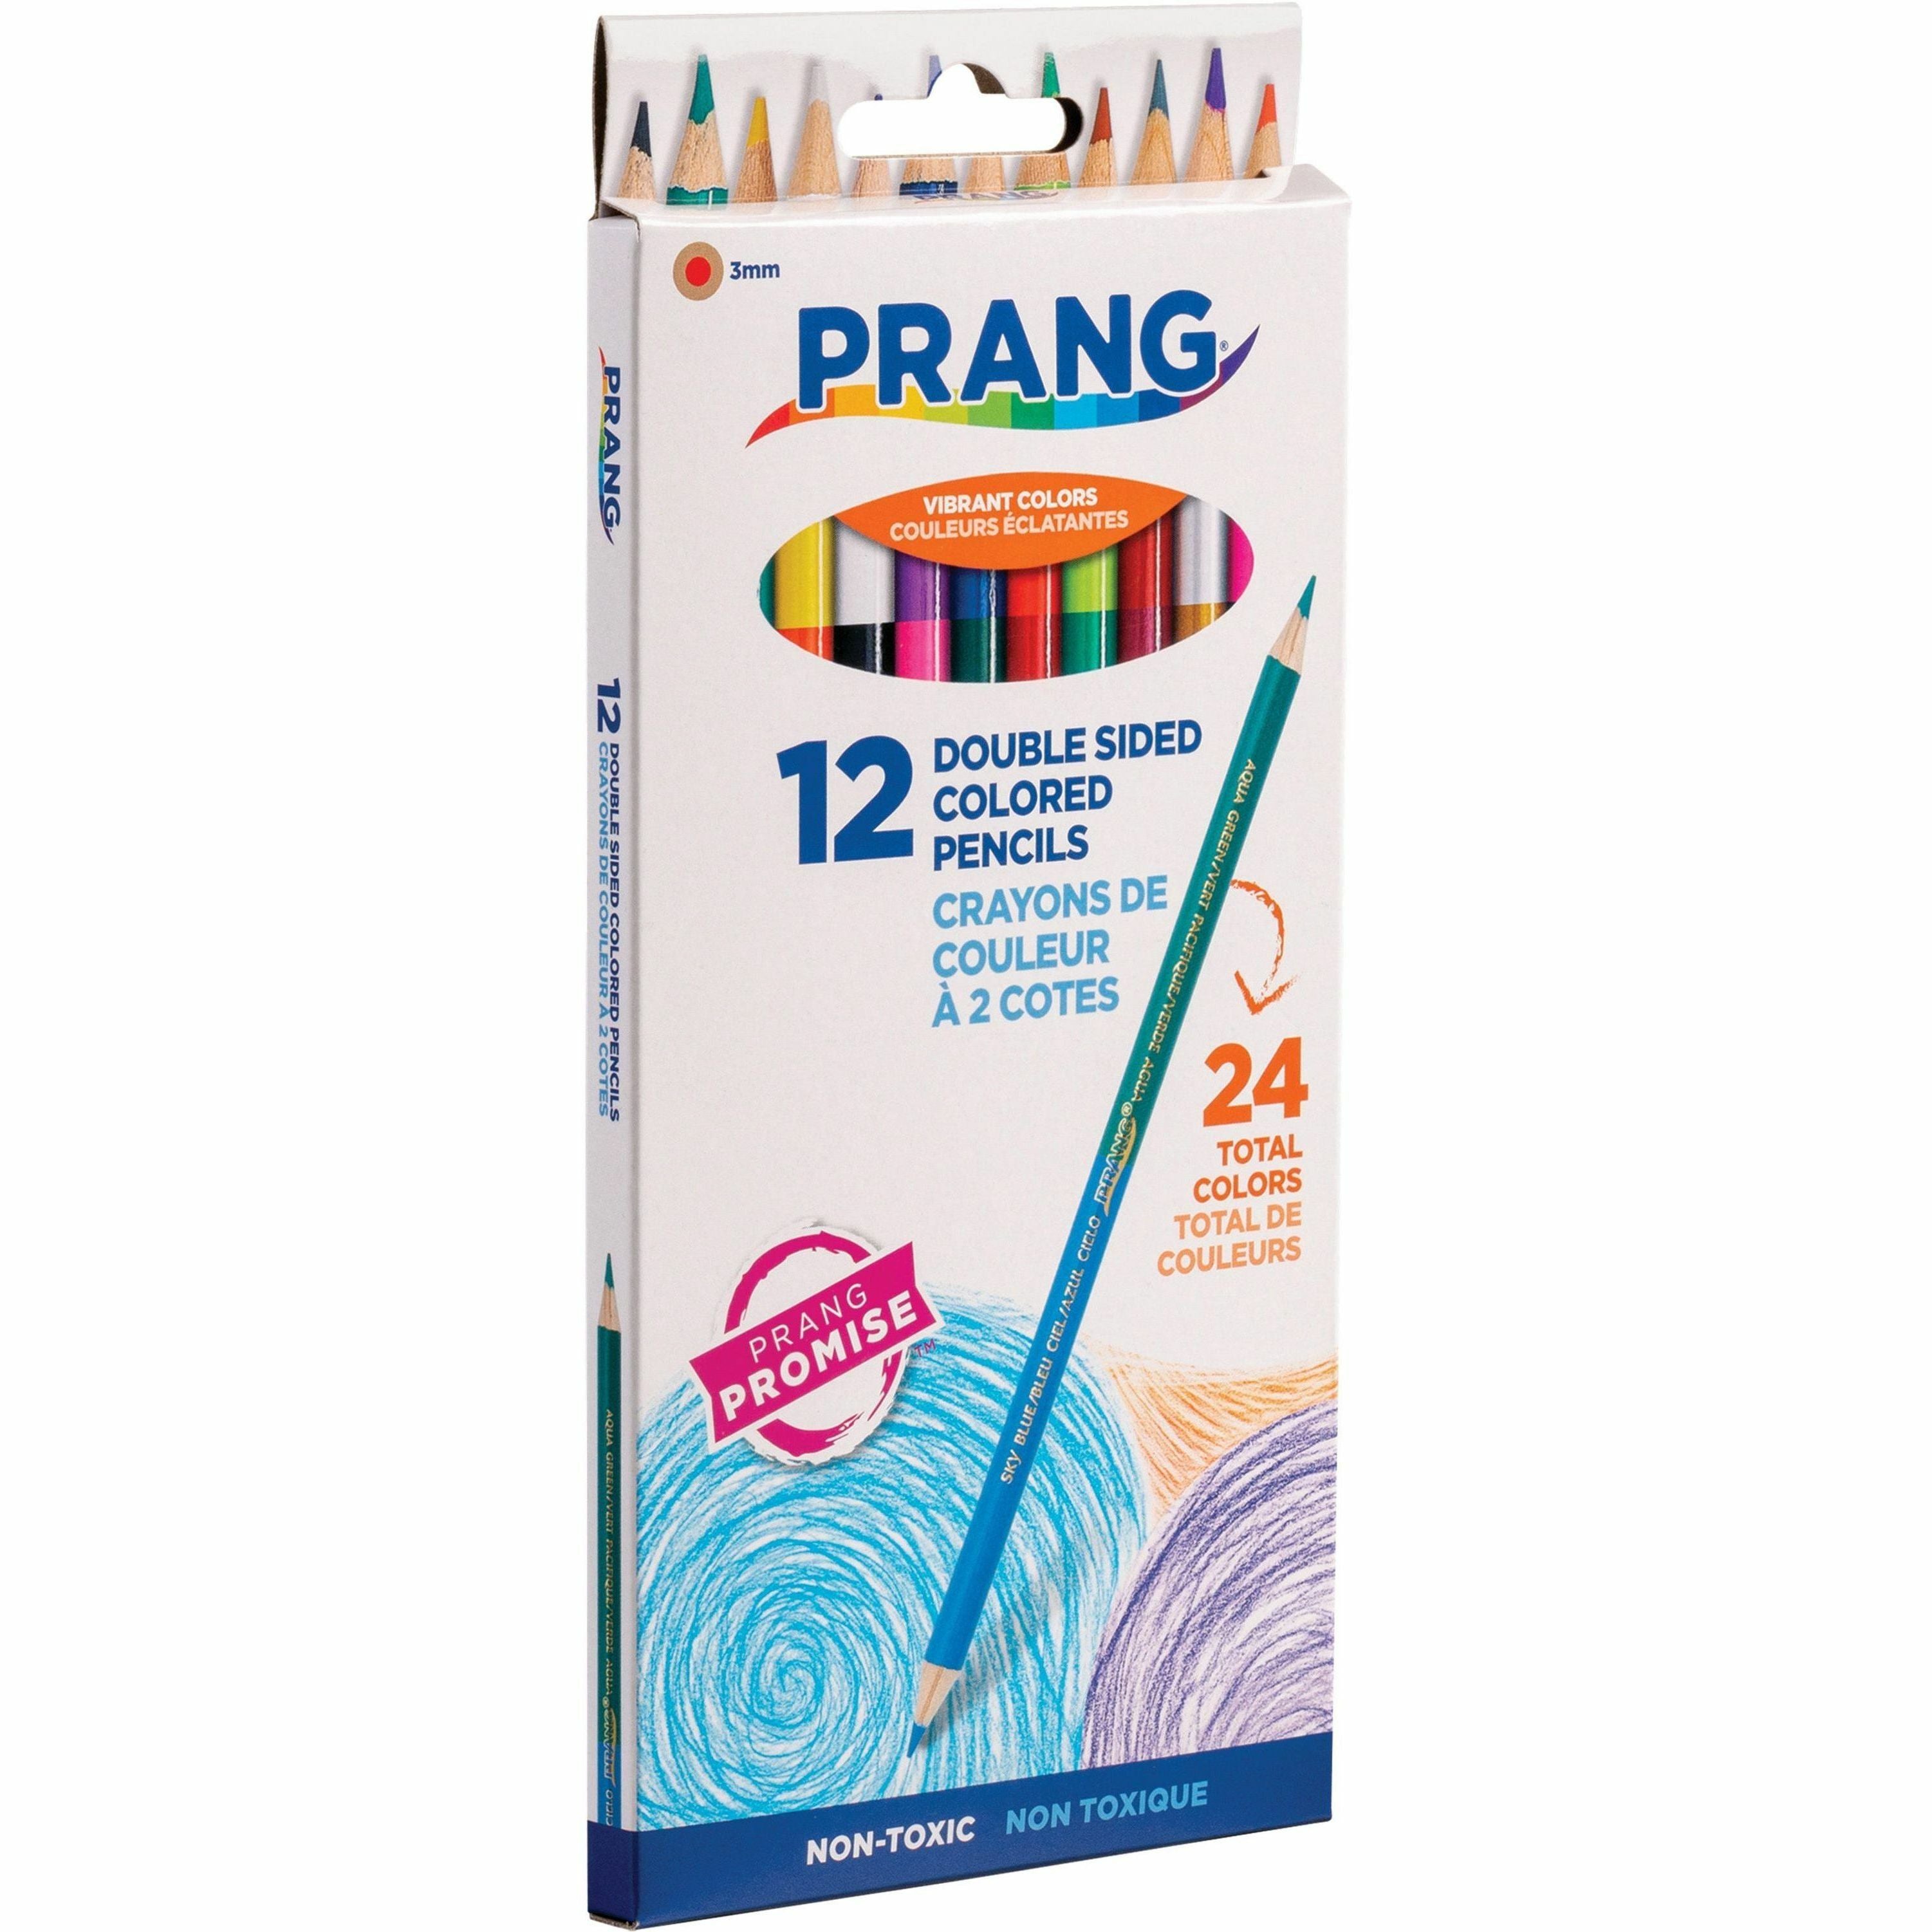 prang-duo-color-double-sided-colored-pencils-3-mm-lead-diameter-1-each_dixx22112 - 3